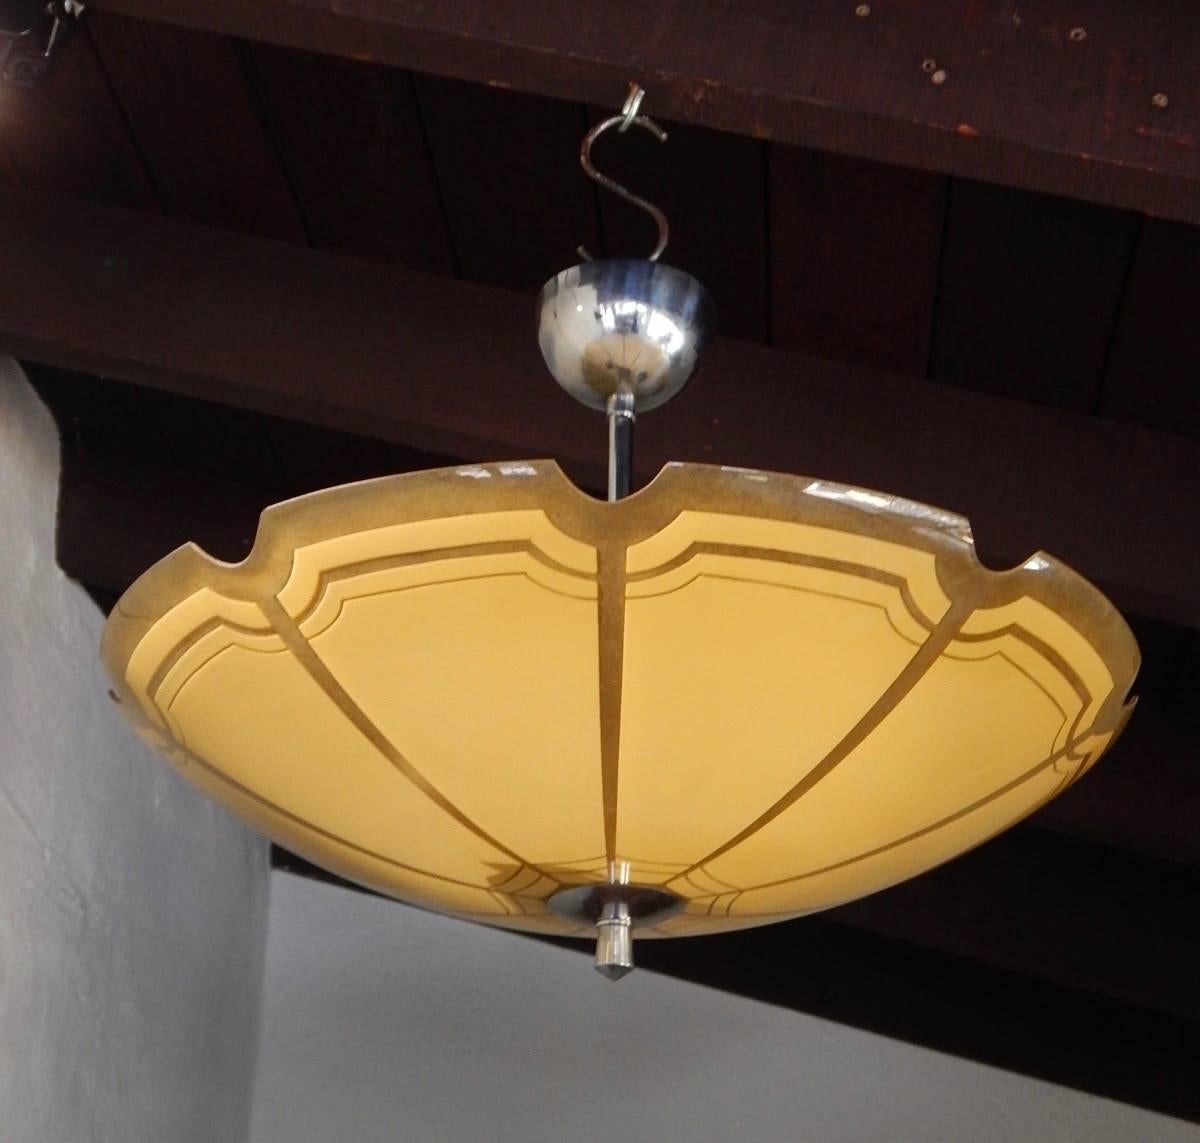 Swedish Mid-Century Modern hanging fixture with glass bowl, circa 1950. Bowl glows a very attractive creamy yellow color. All original with bowl in excellent condition. Two standard base bulb receptacles. Price includes complete rewiring.